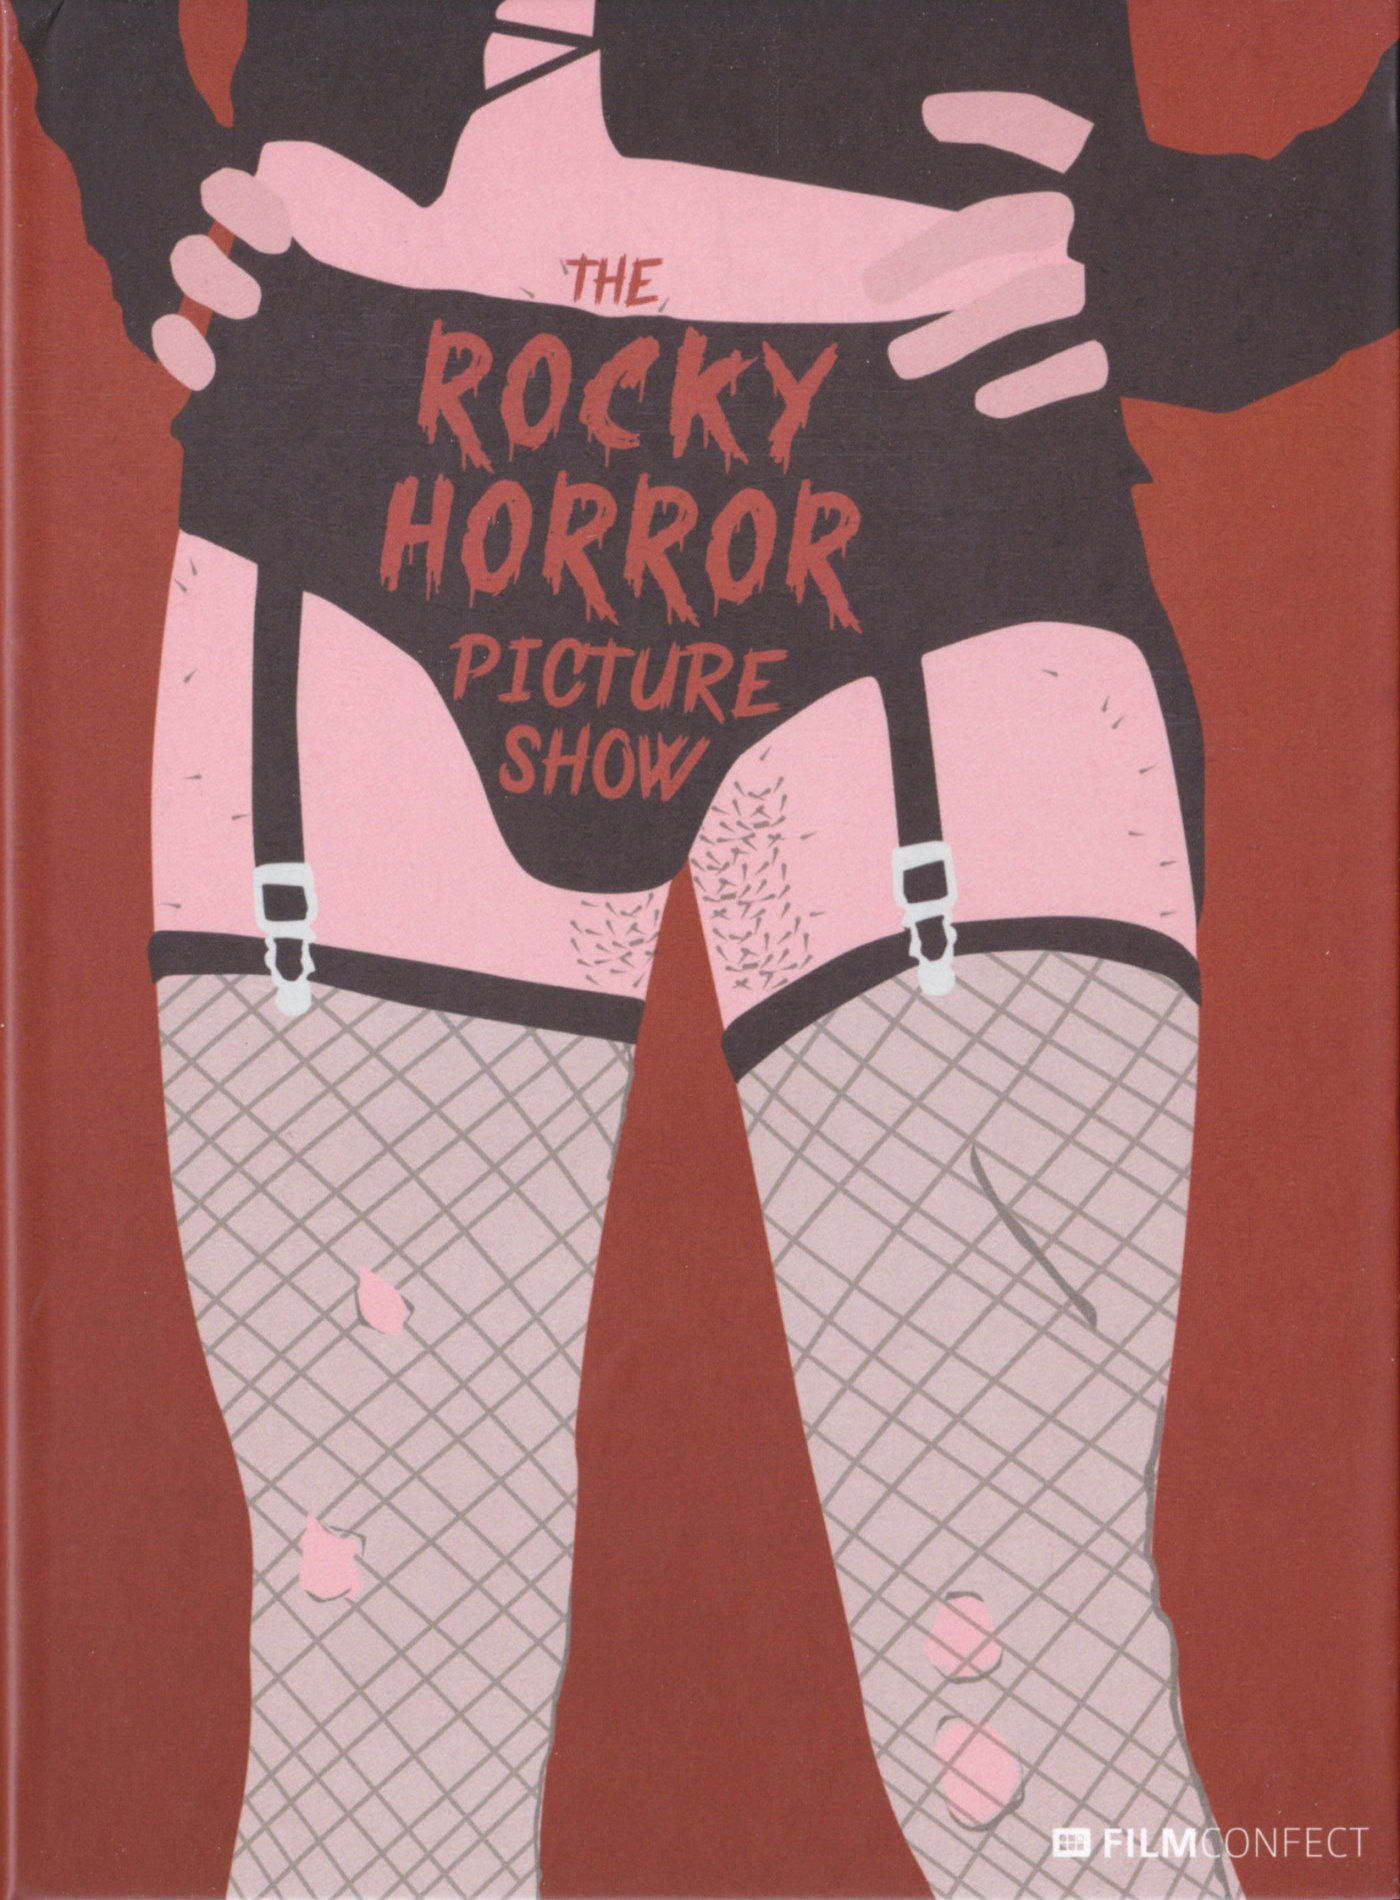 Cover - The Rocky Horror Picture Show.jpg